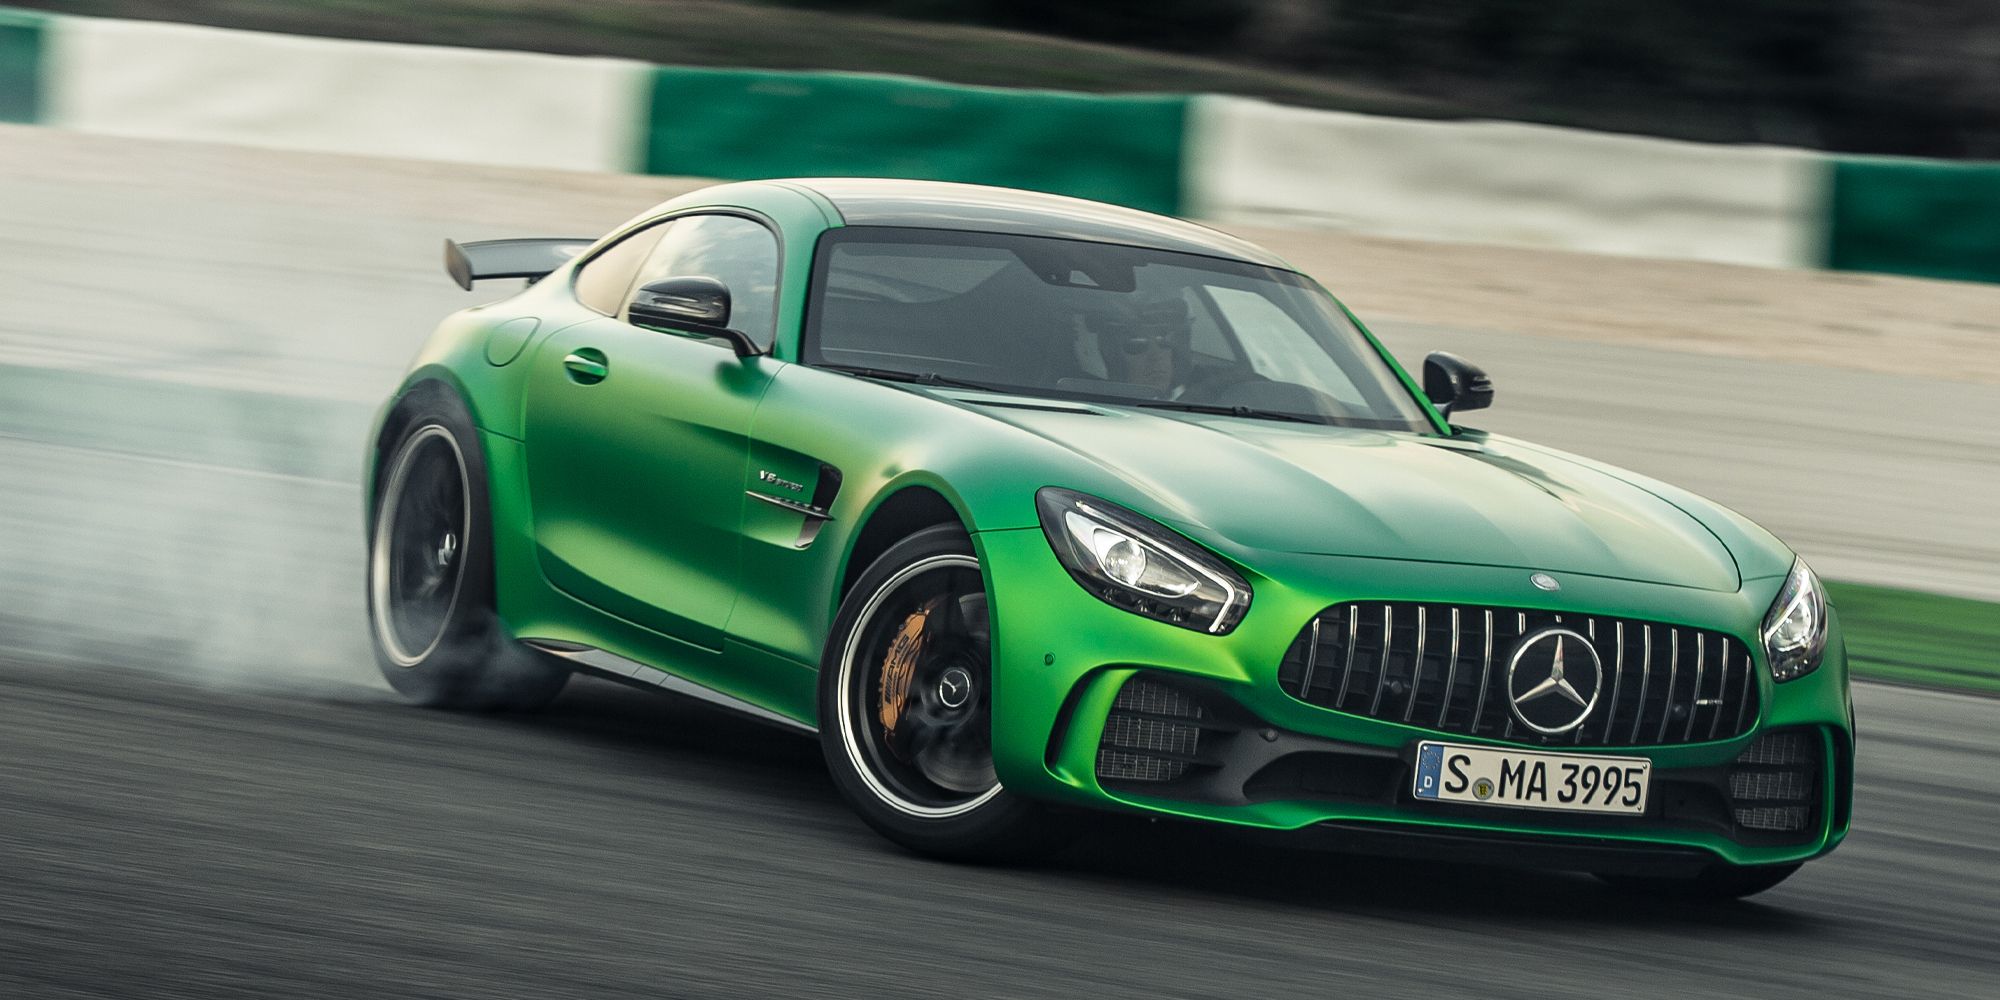 The AMG GT R getting the tail out